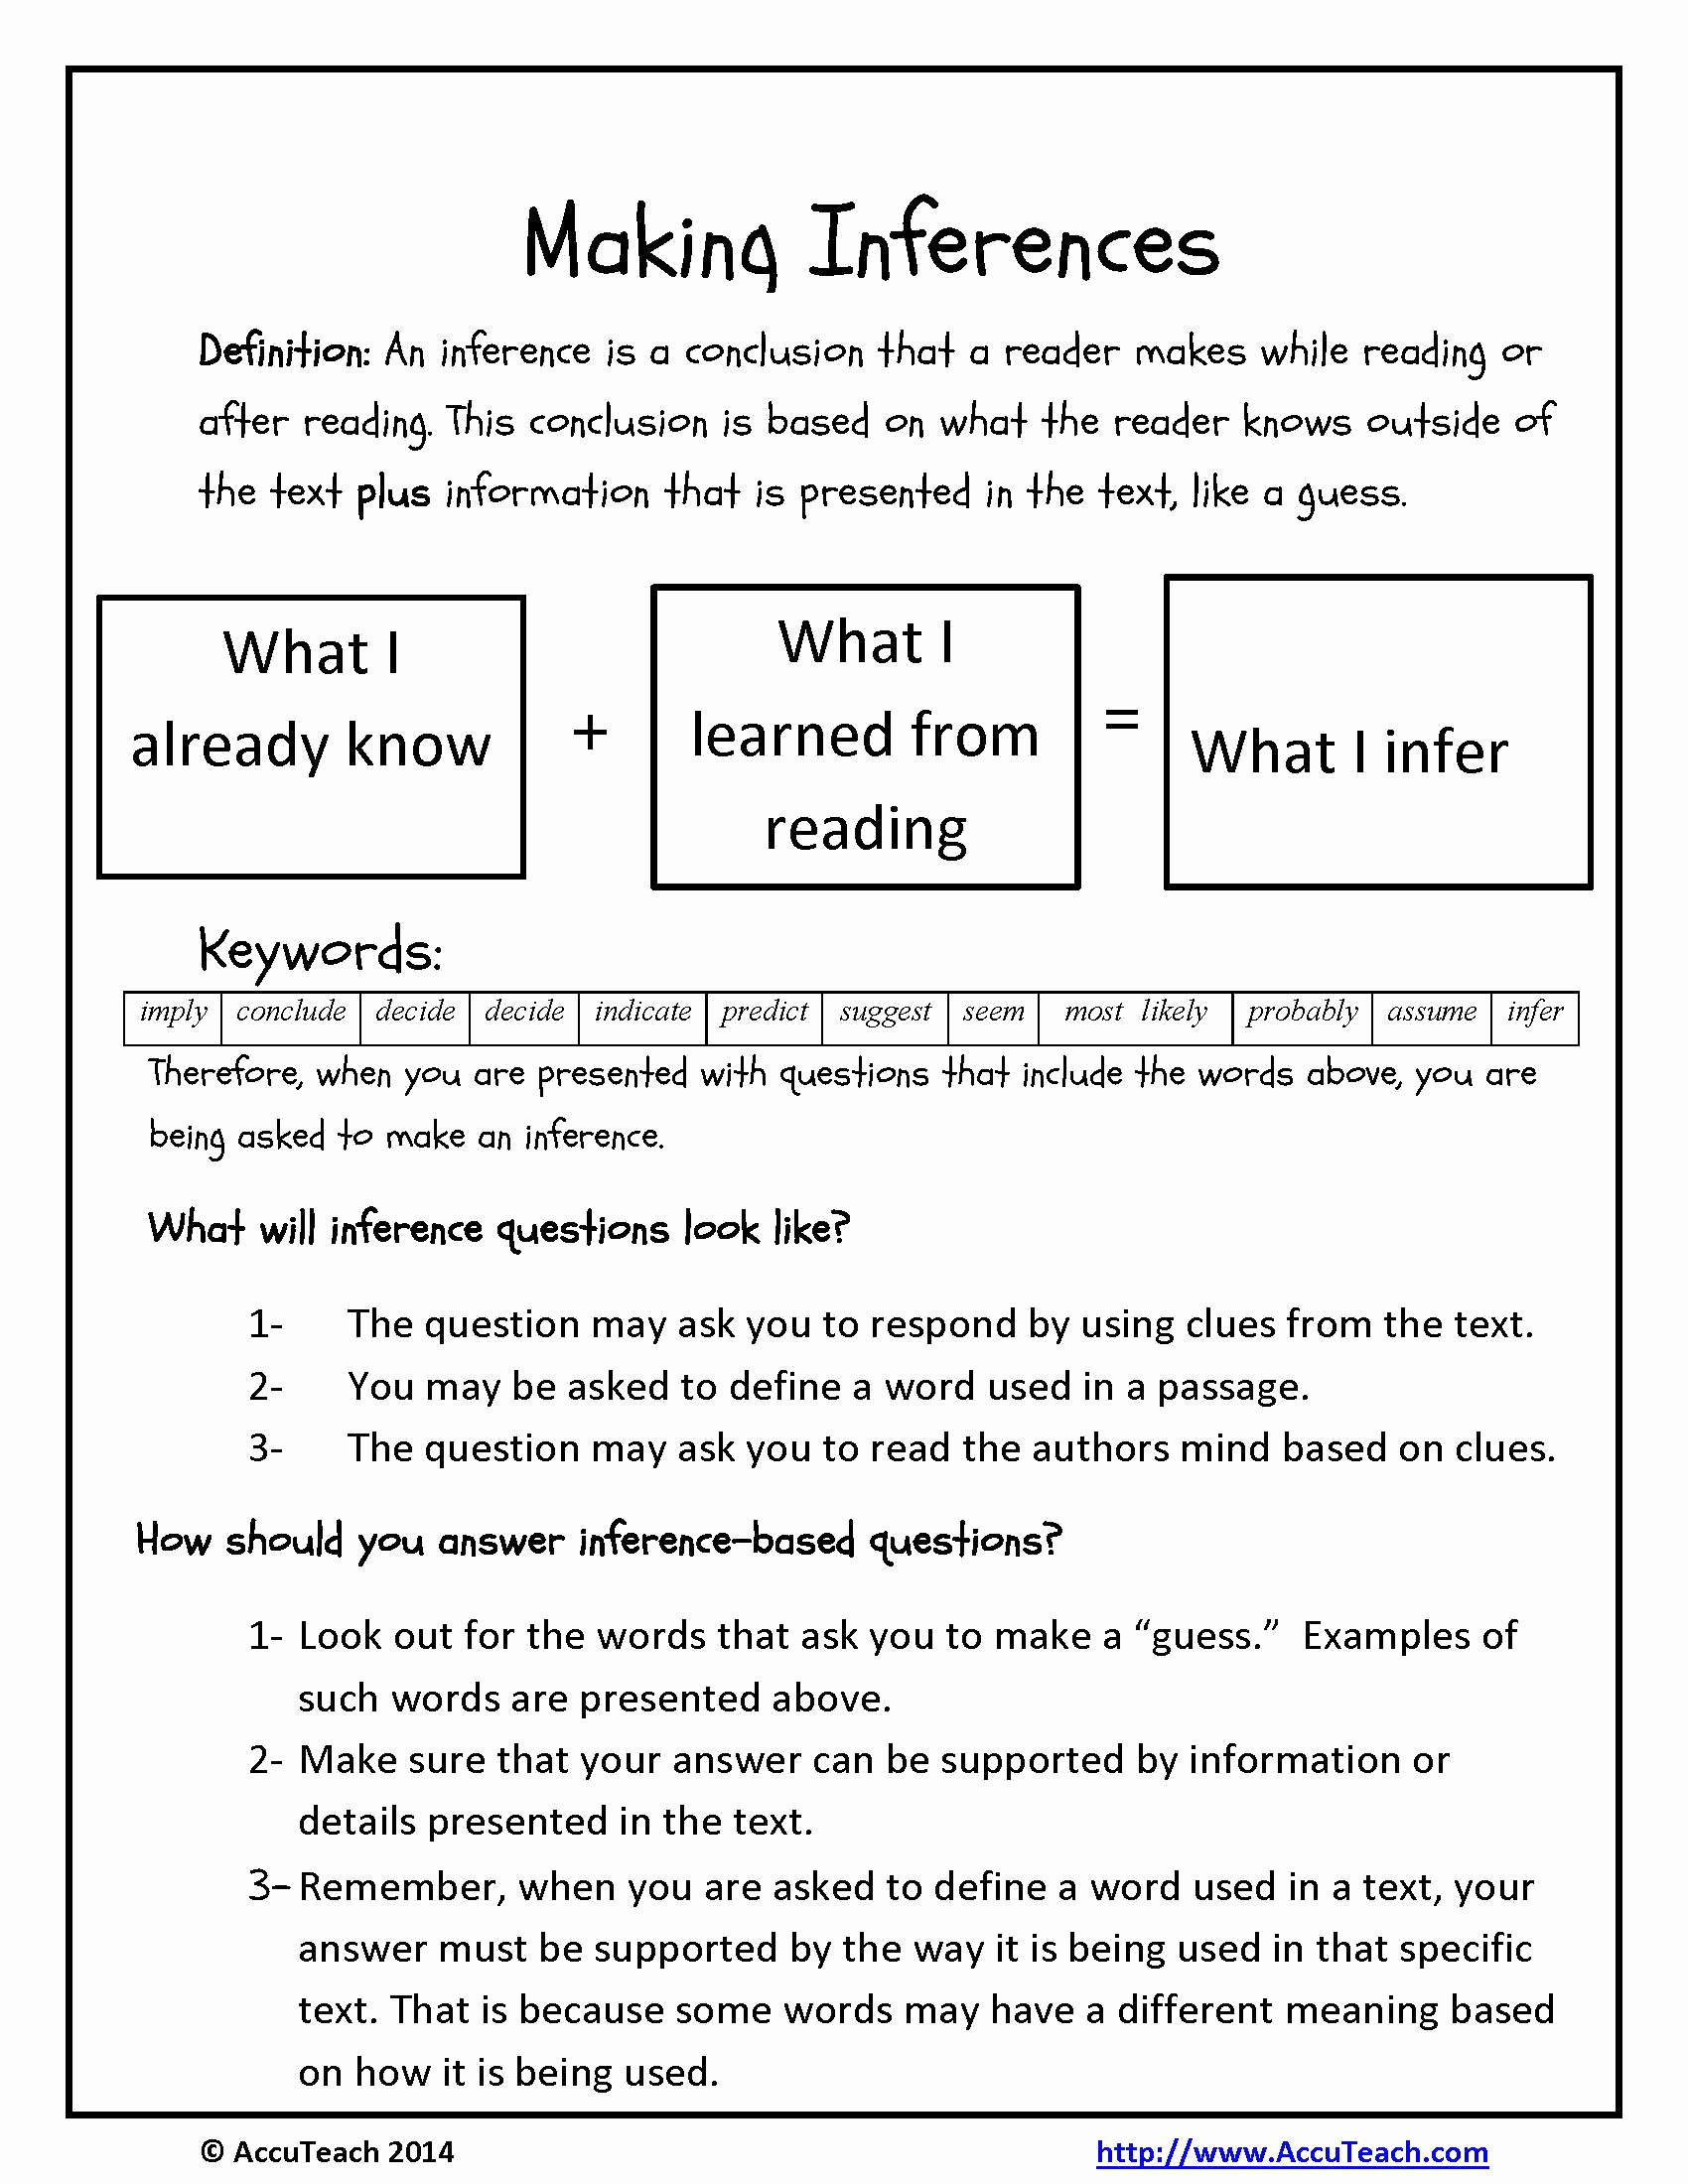 Making Inferences Worksheets 4th Grade Best Of 20 Inference Worksheets 4th Grade